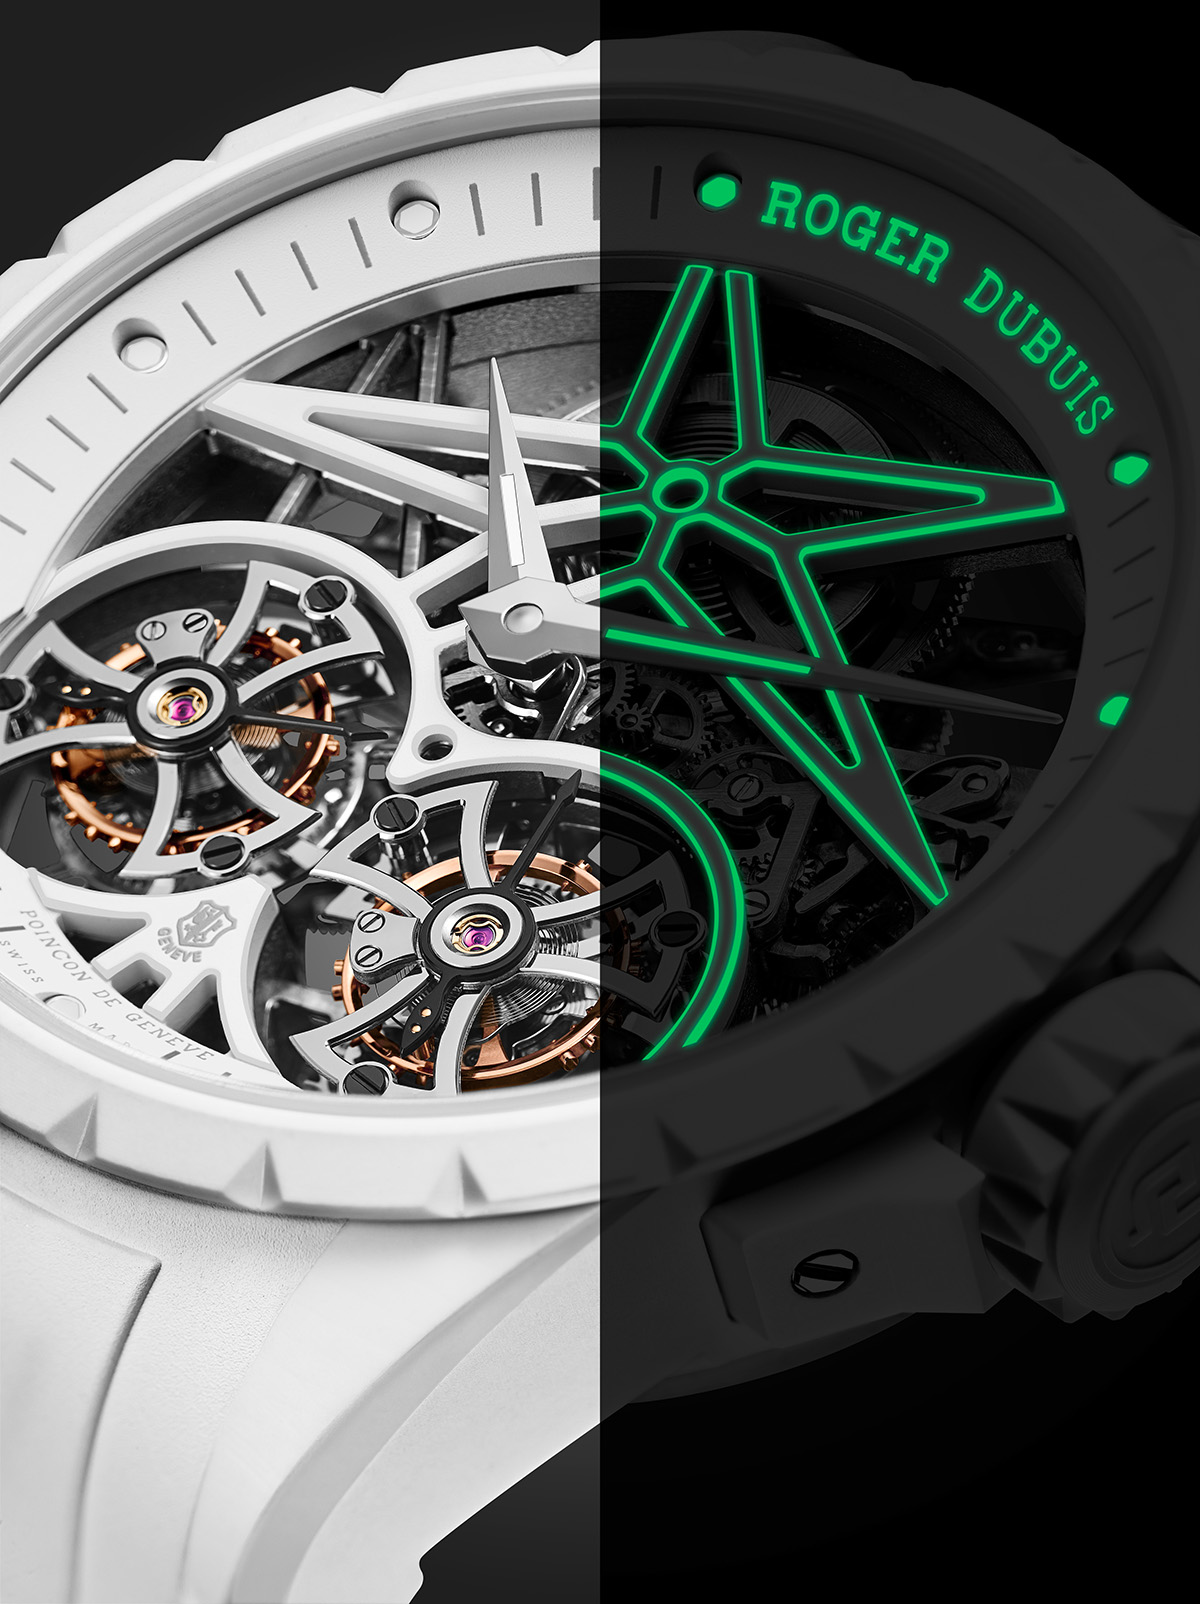 Roger Dubuis Excalibur Twofold two fx